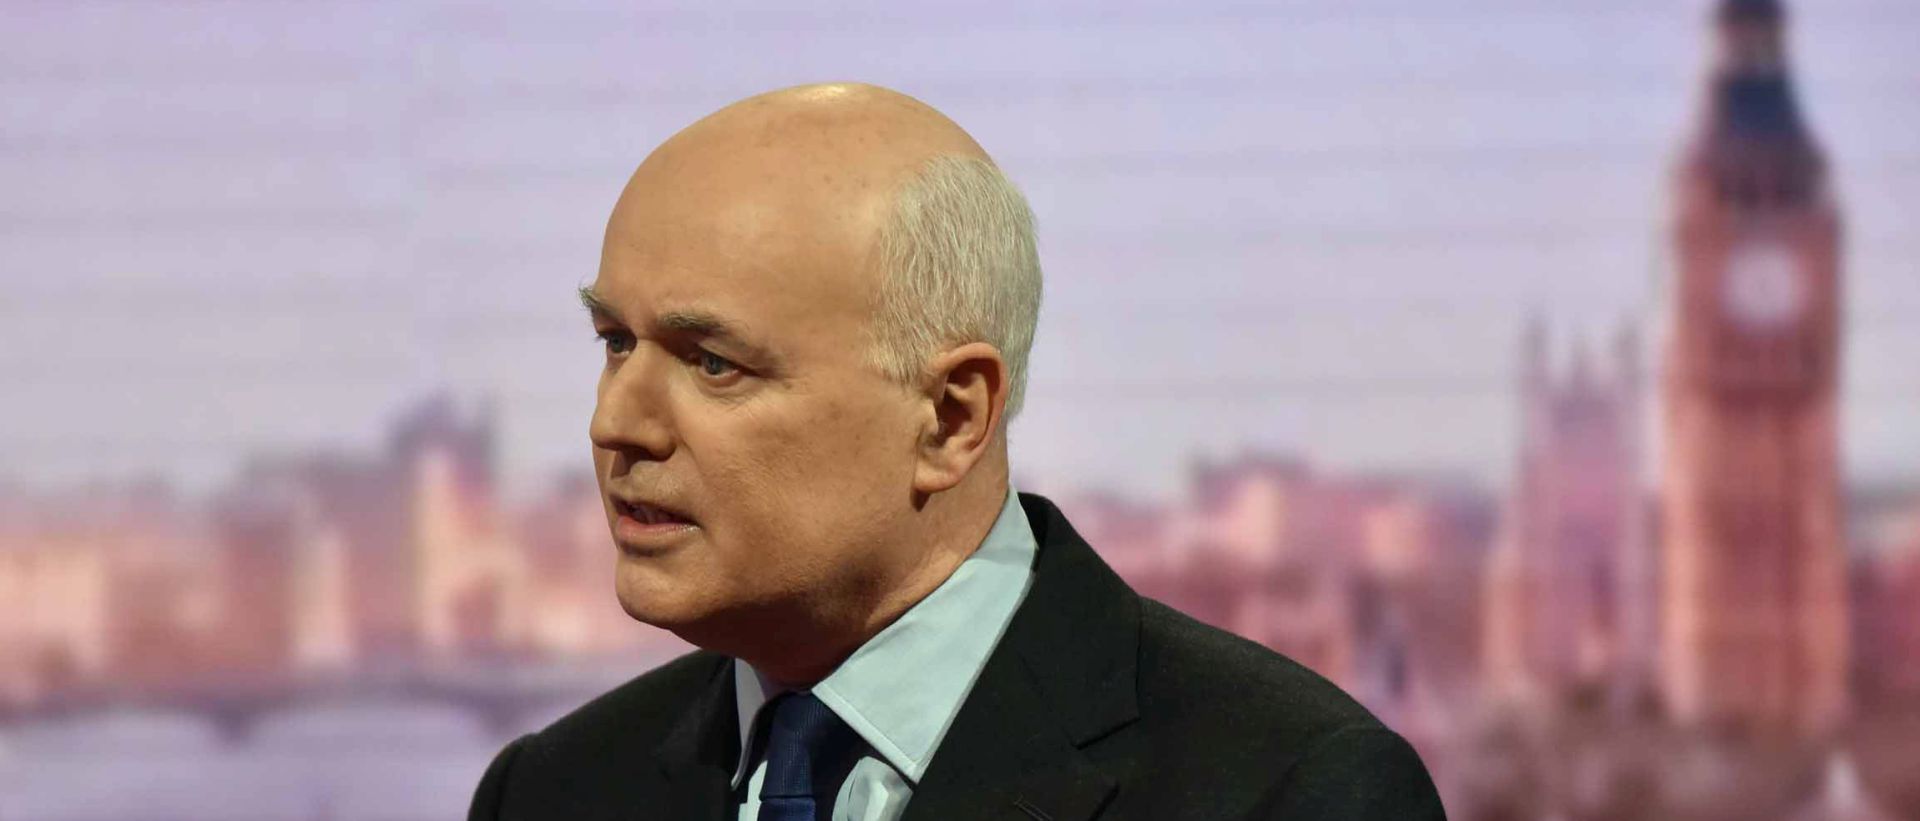 epa05222158 A handout image from the British Broadcasting Corporation (BBC) shows former Work and Pensions Minister Iain Duncan Smith appearing on the Andrew Marr show at BBC Studios, Central London, Britain, 20 March 2016. Mr Duncan Smith resigned from the British Cabinet this week citing concerns of welfare cuts in the latest budget by Chancellor George Osborne.  EPA/JEFF OVERS / BBC / HANDOUT  HANDOUT EDITORIAL USE ONLY/NO SALES